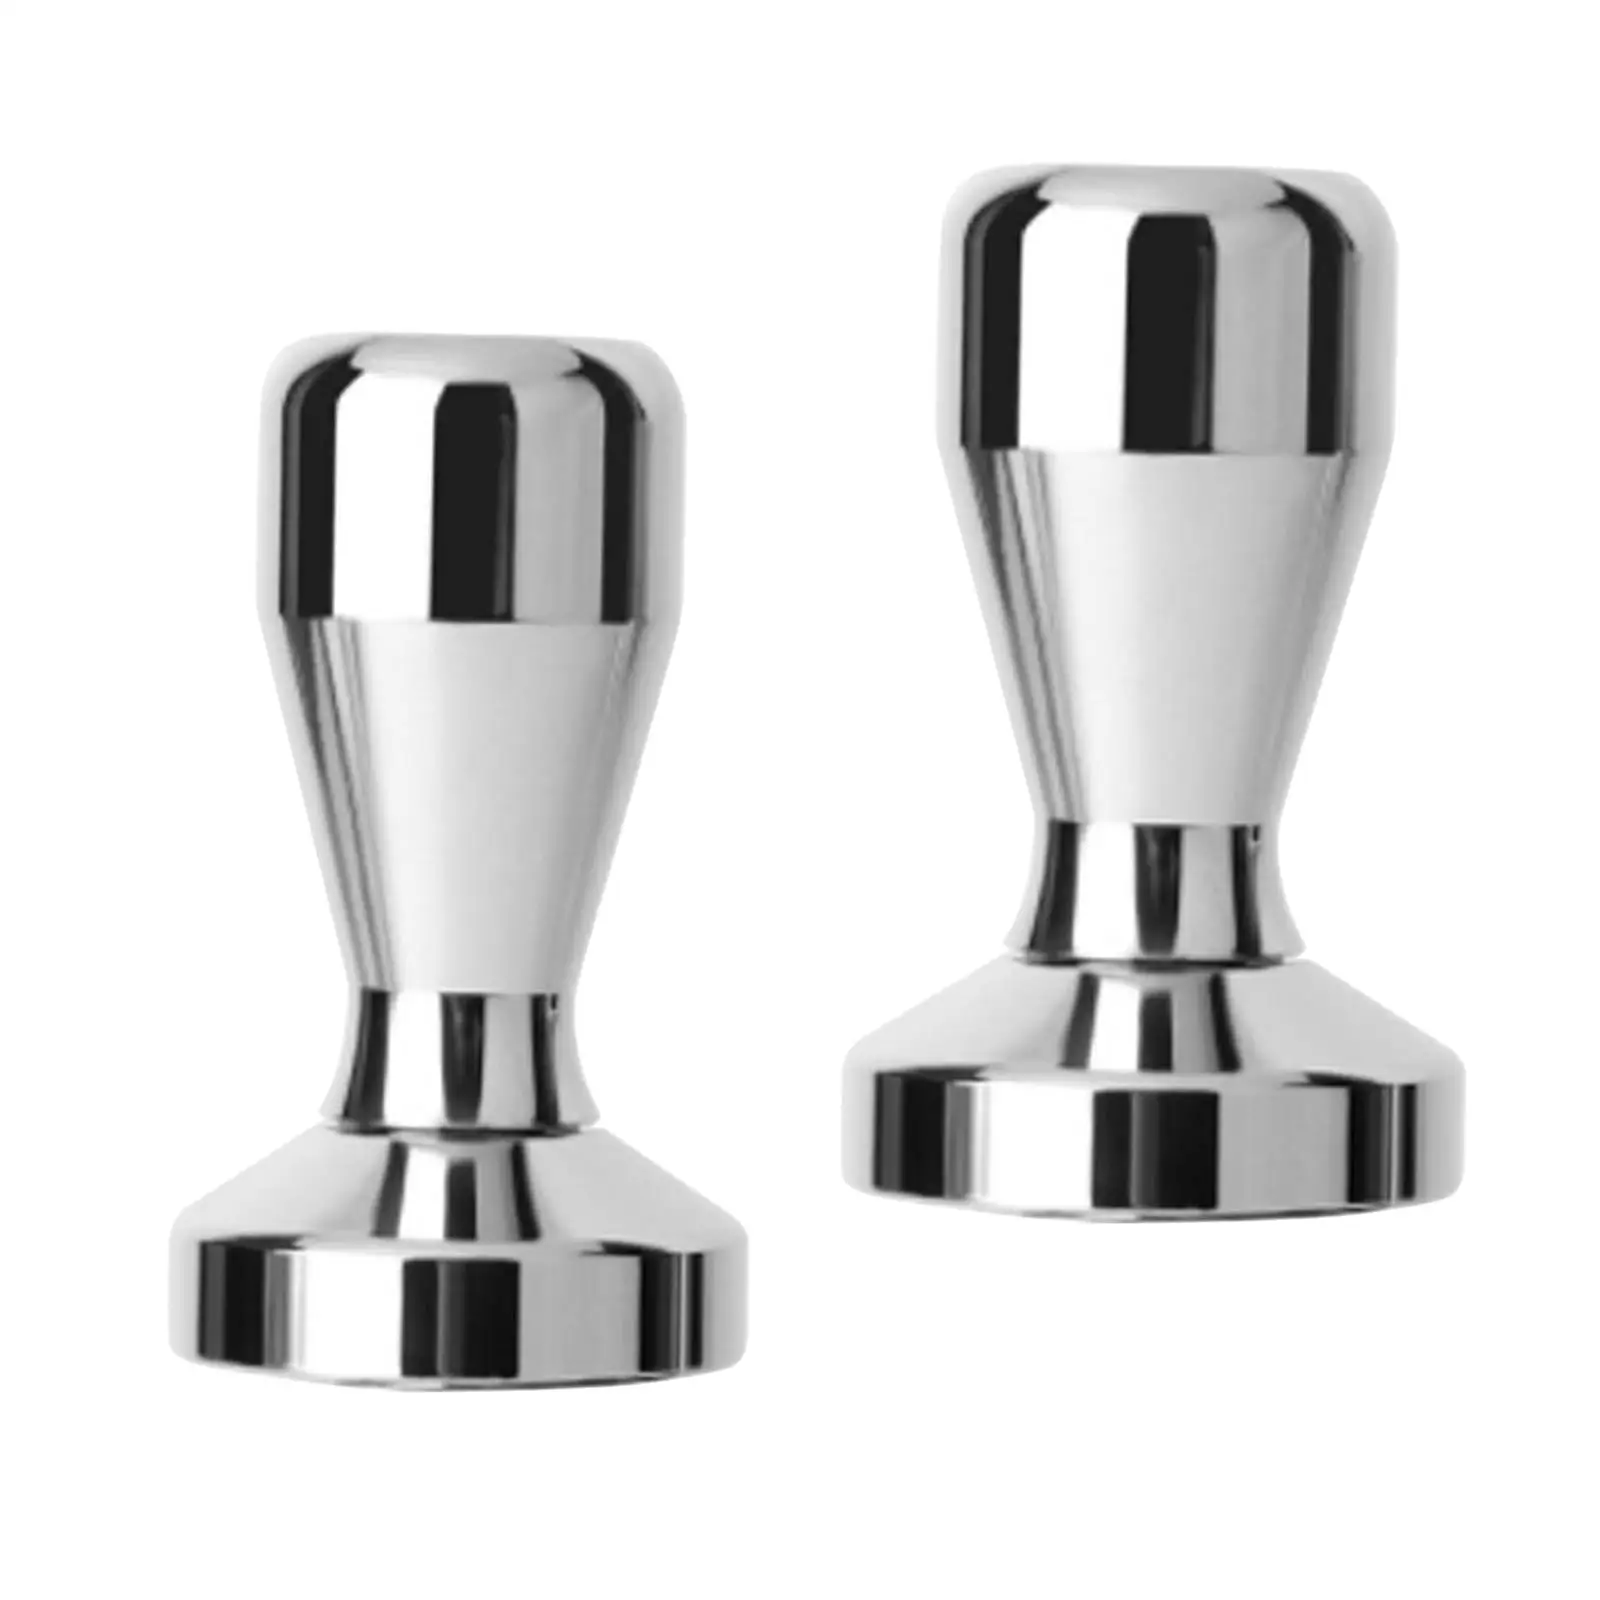 Stainless Steel Coffee Tamper Espresso Tamper Espresso Machine Accessory Coffee Leveler Tool for Home